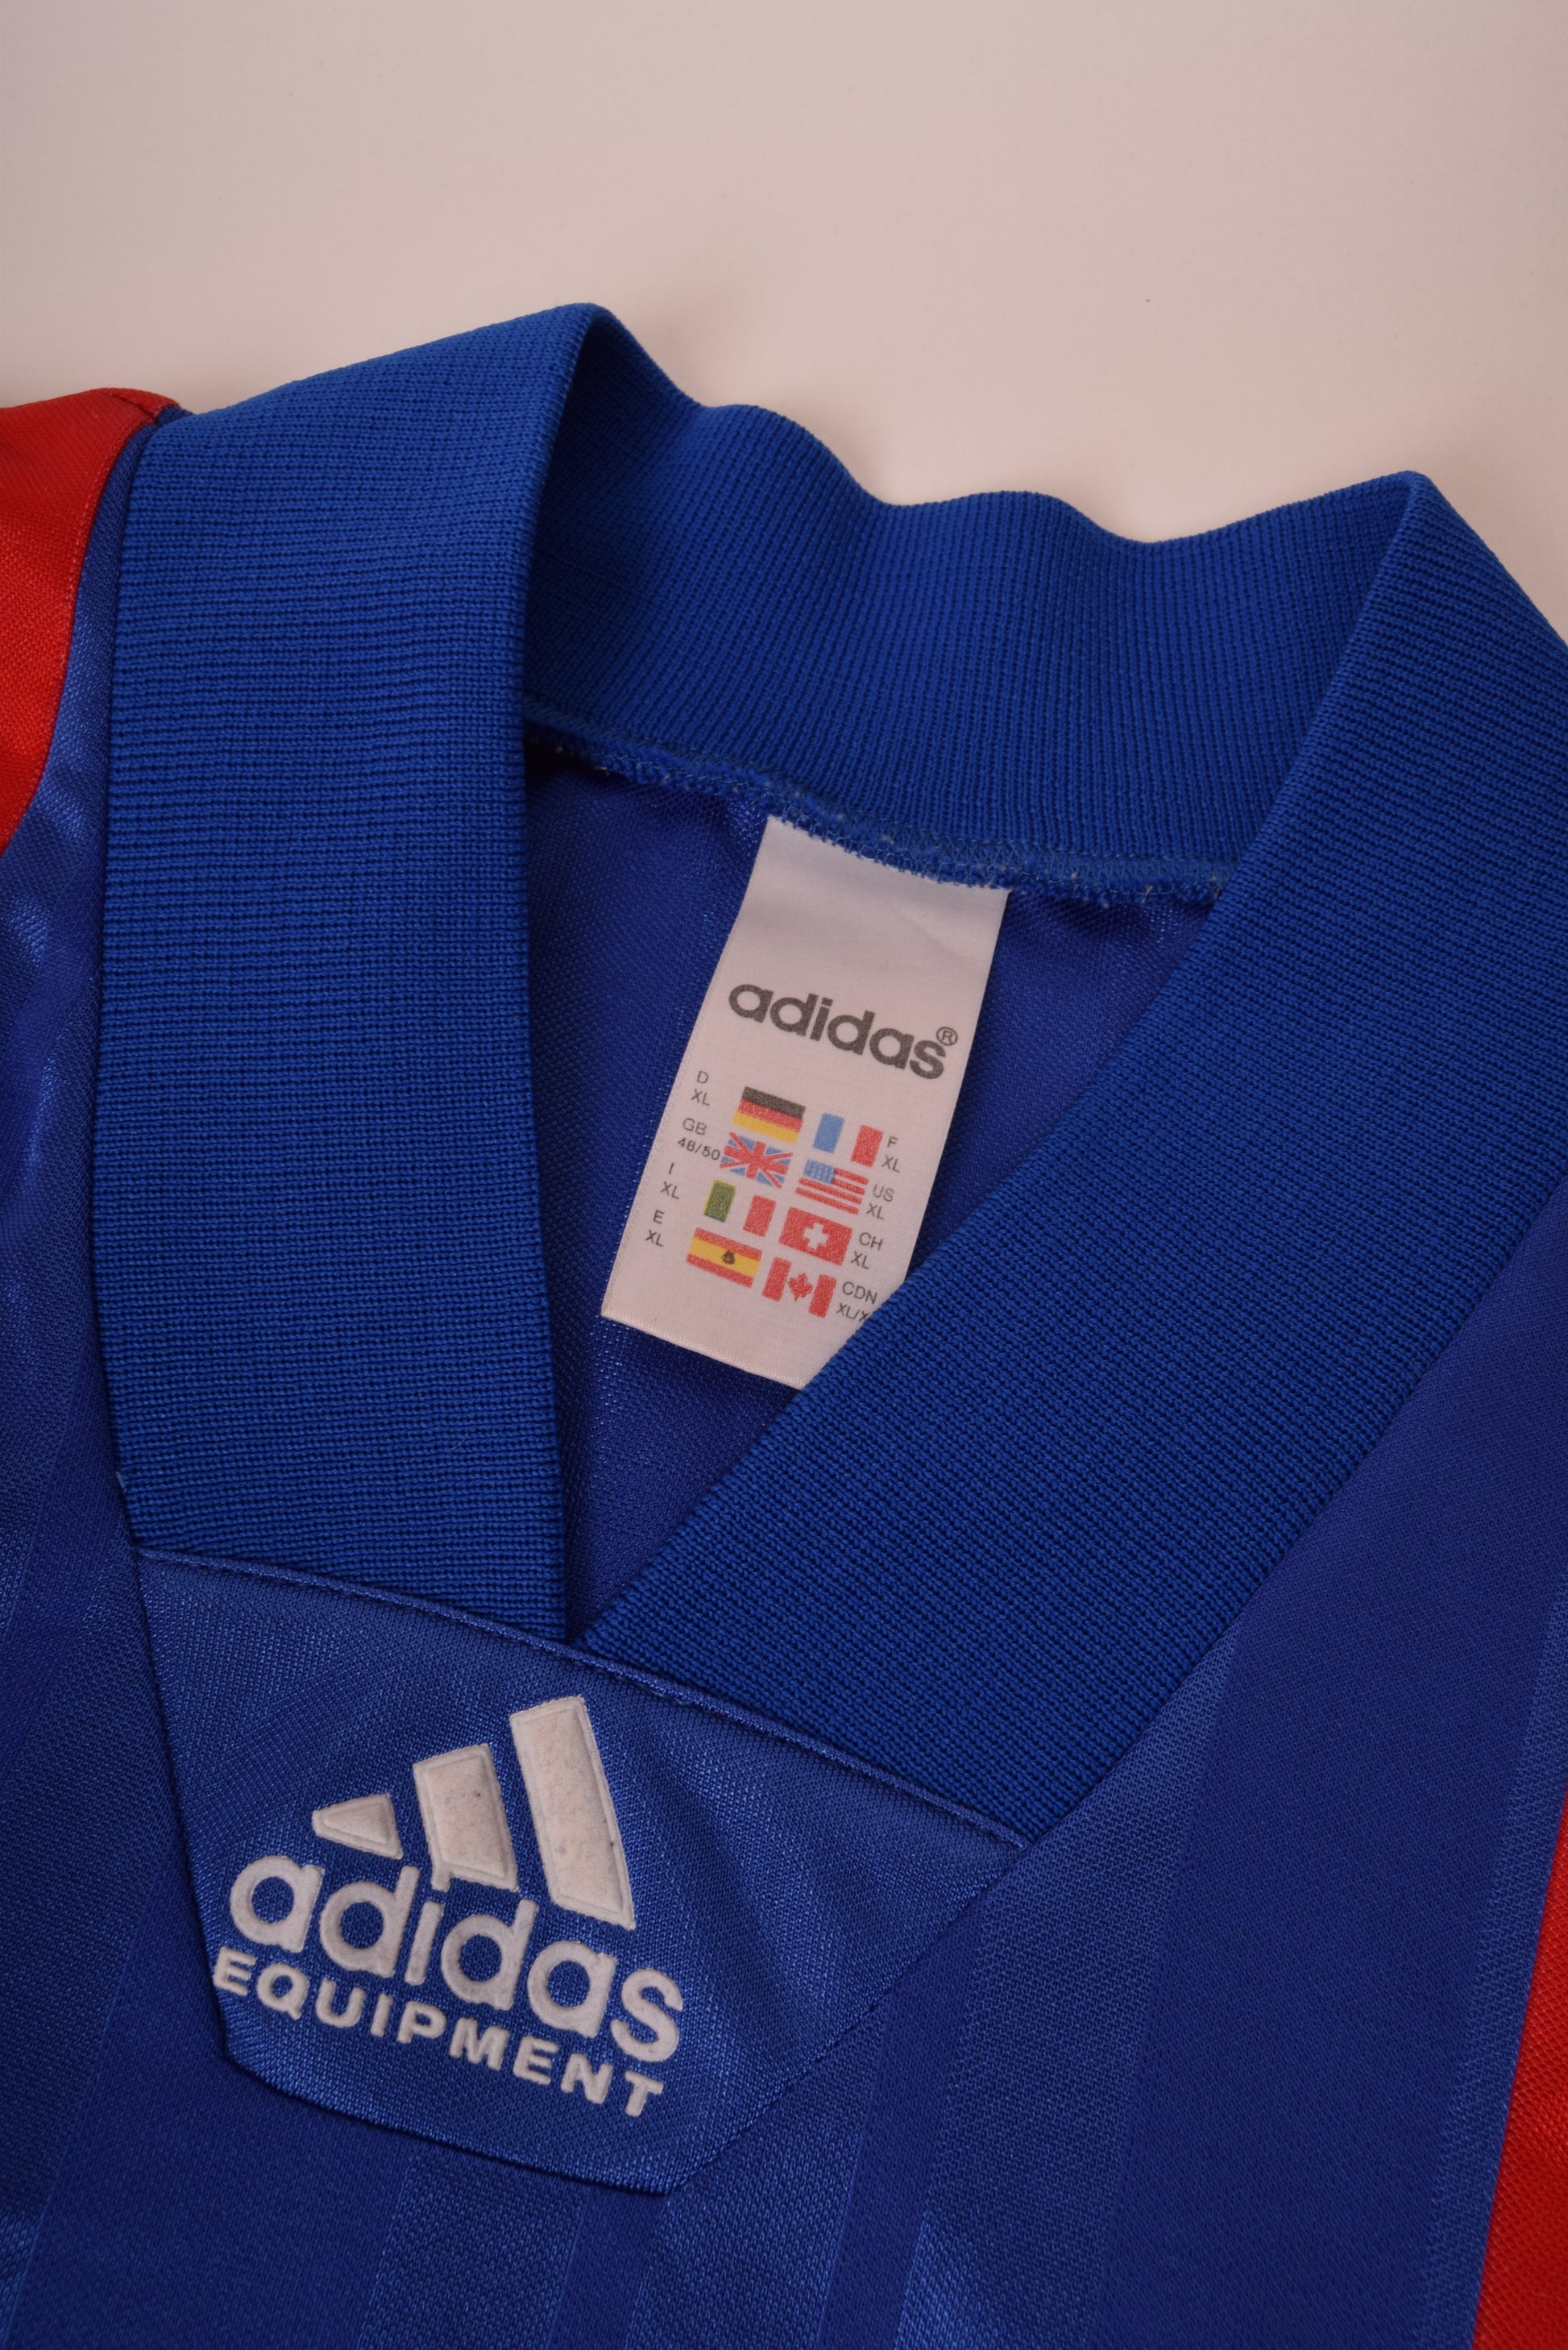 Vintage France Adidas Equipment 1992-1993 Home Football Shirt Size XL Blue Red White